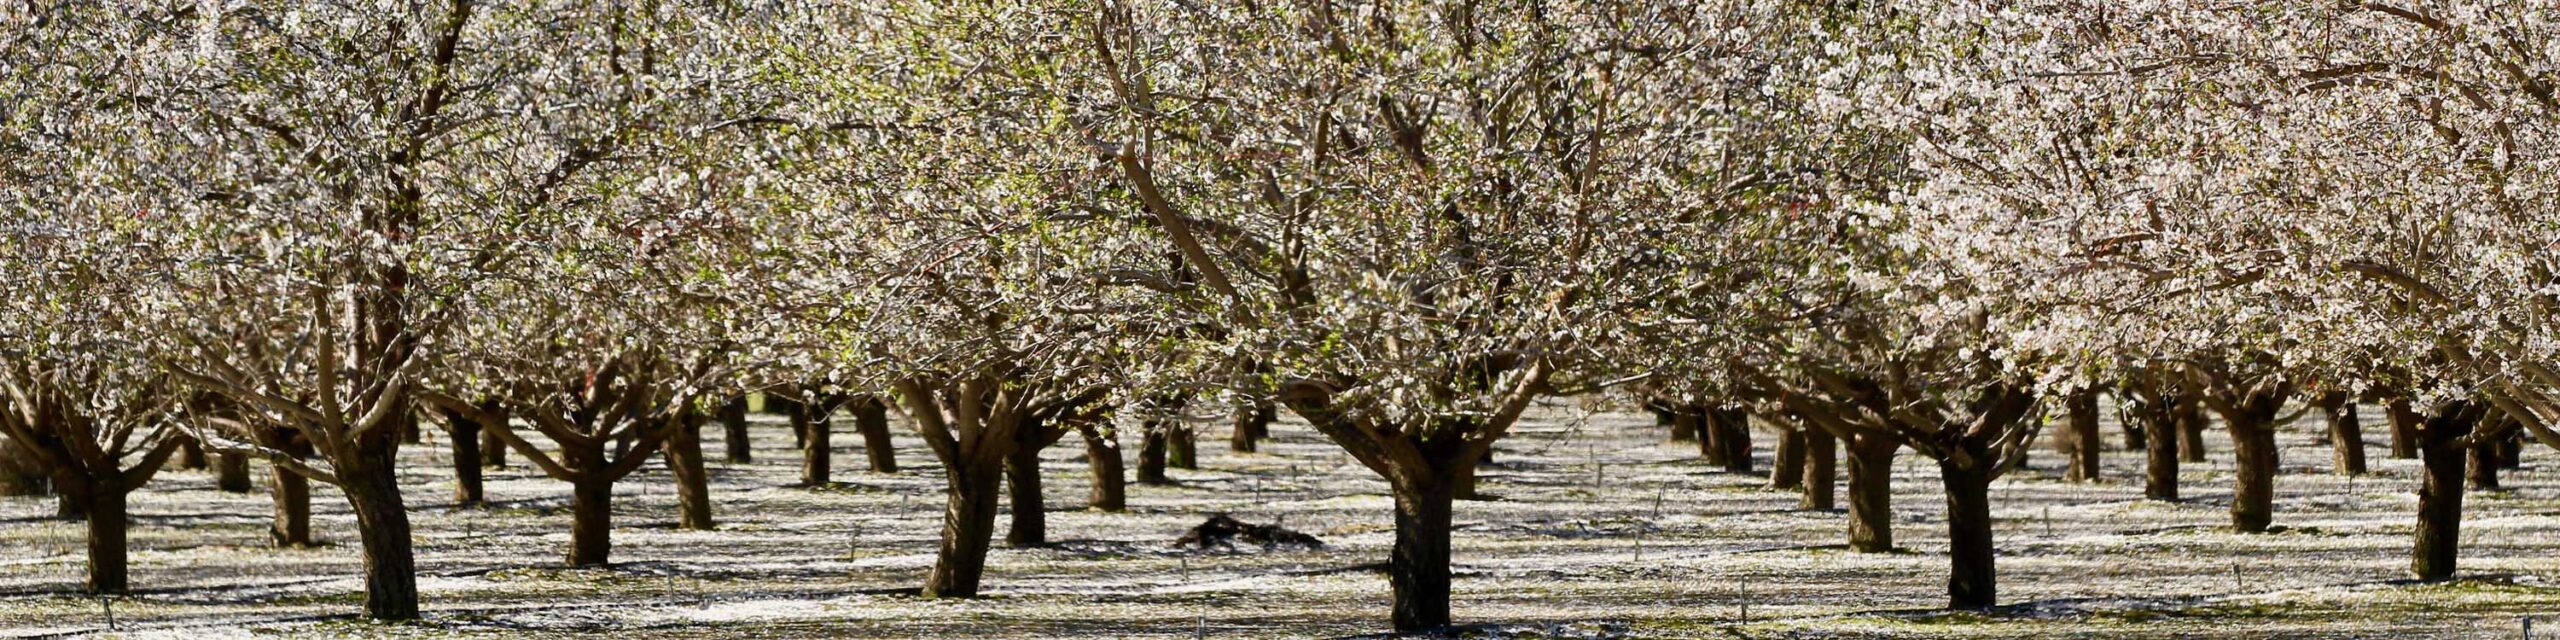 Almond orchard with rows of flowering trees.